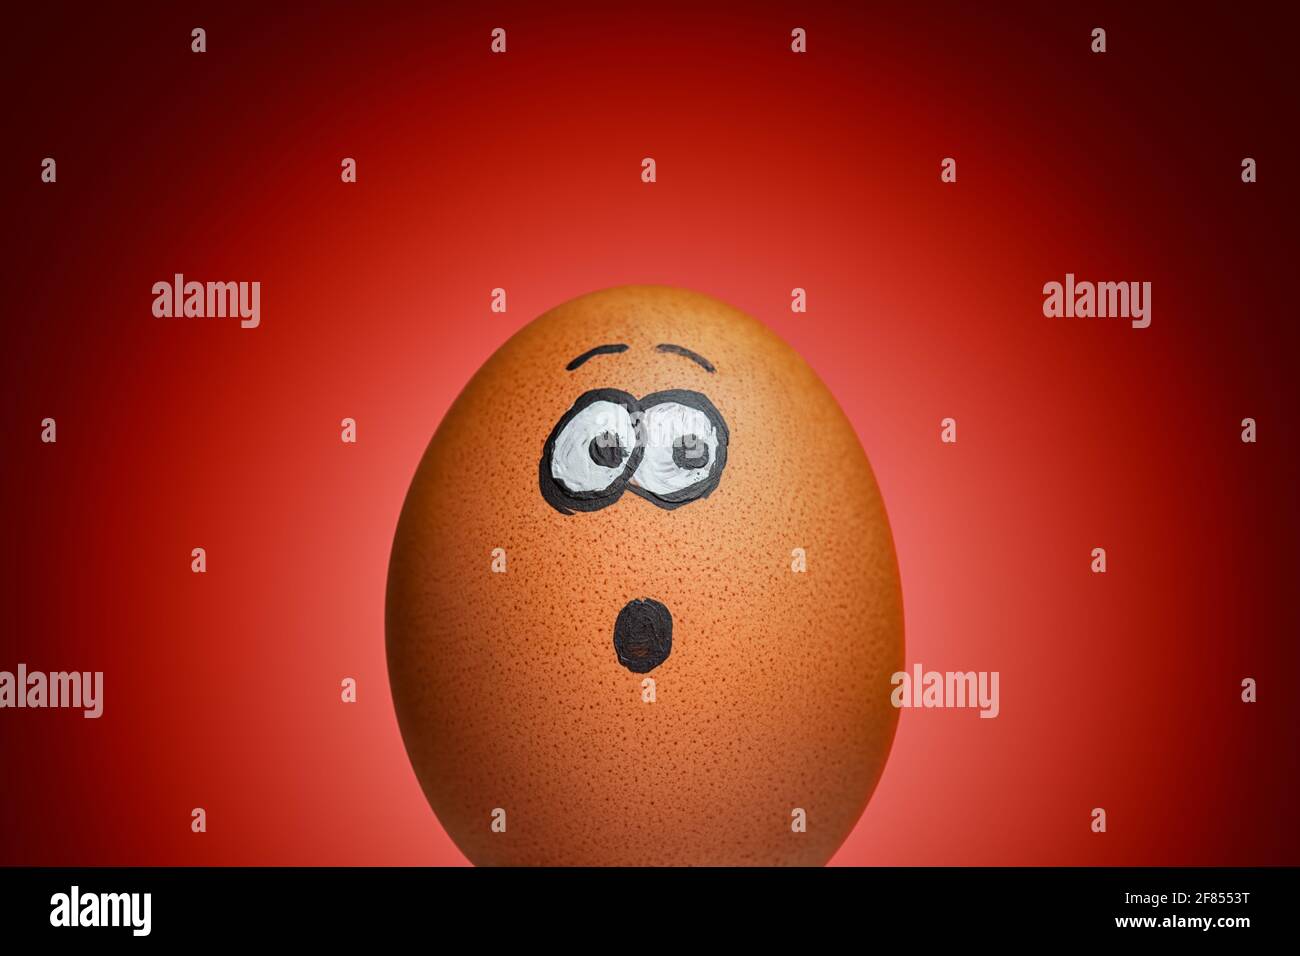 Scared or Surprised Egg on Dramatic Red Background Stock Photo